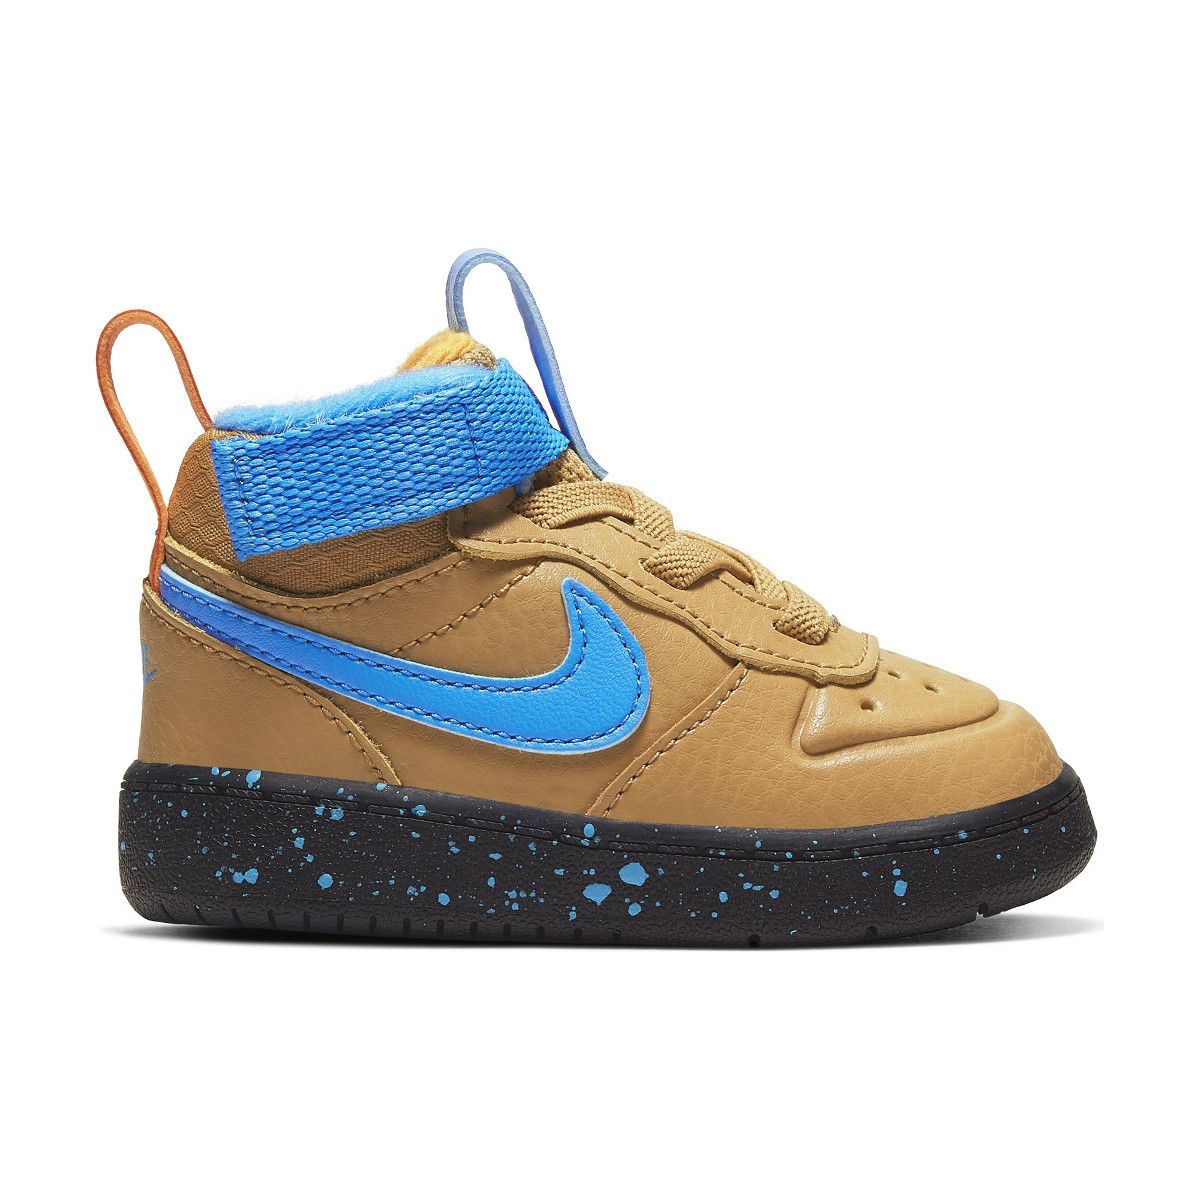 Nike Court Borough Mid 2 Toddler's Boot Sports Shoes (TD) BQ